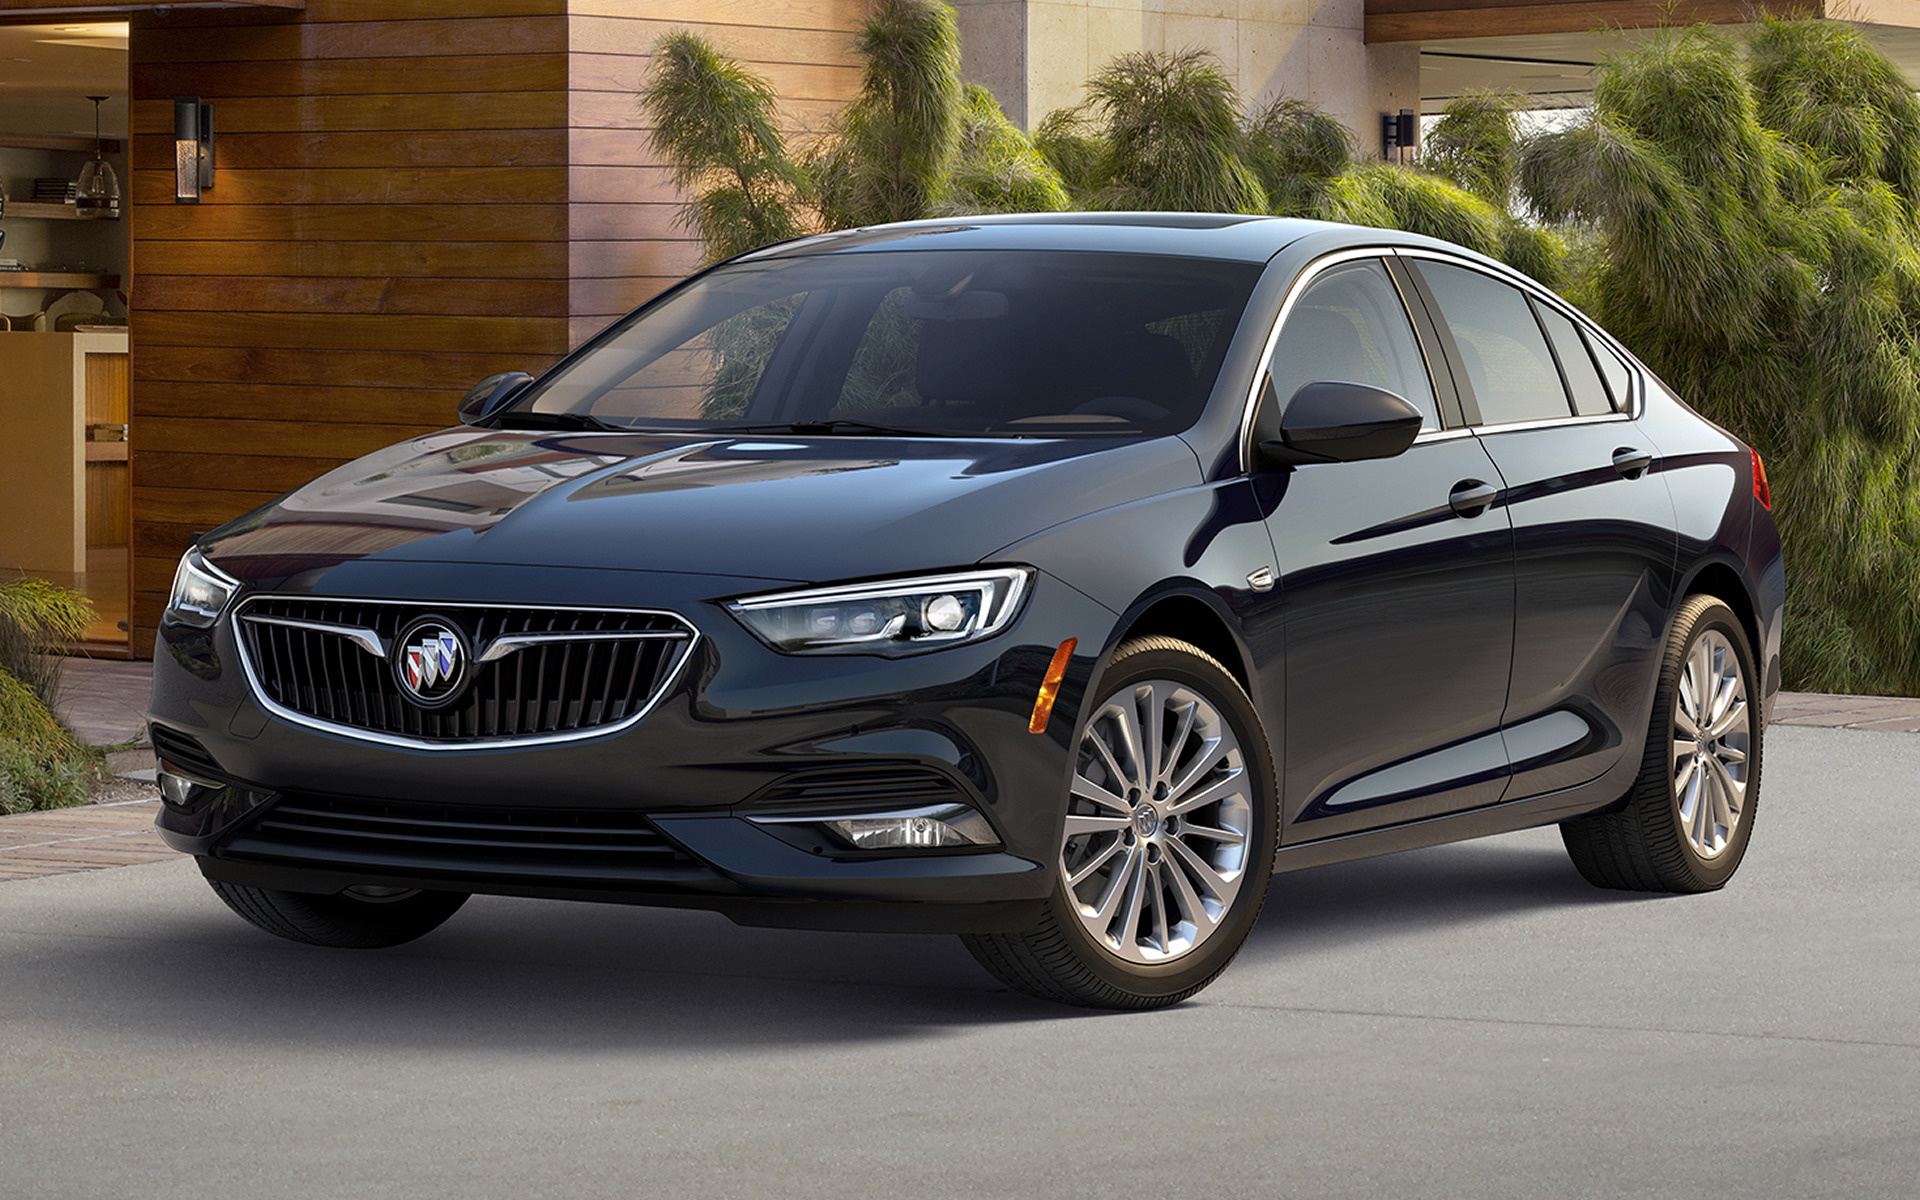 Buick Regal Gs Wallpapers